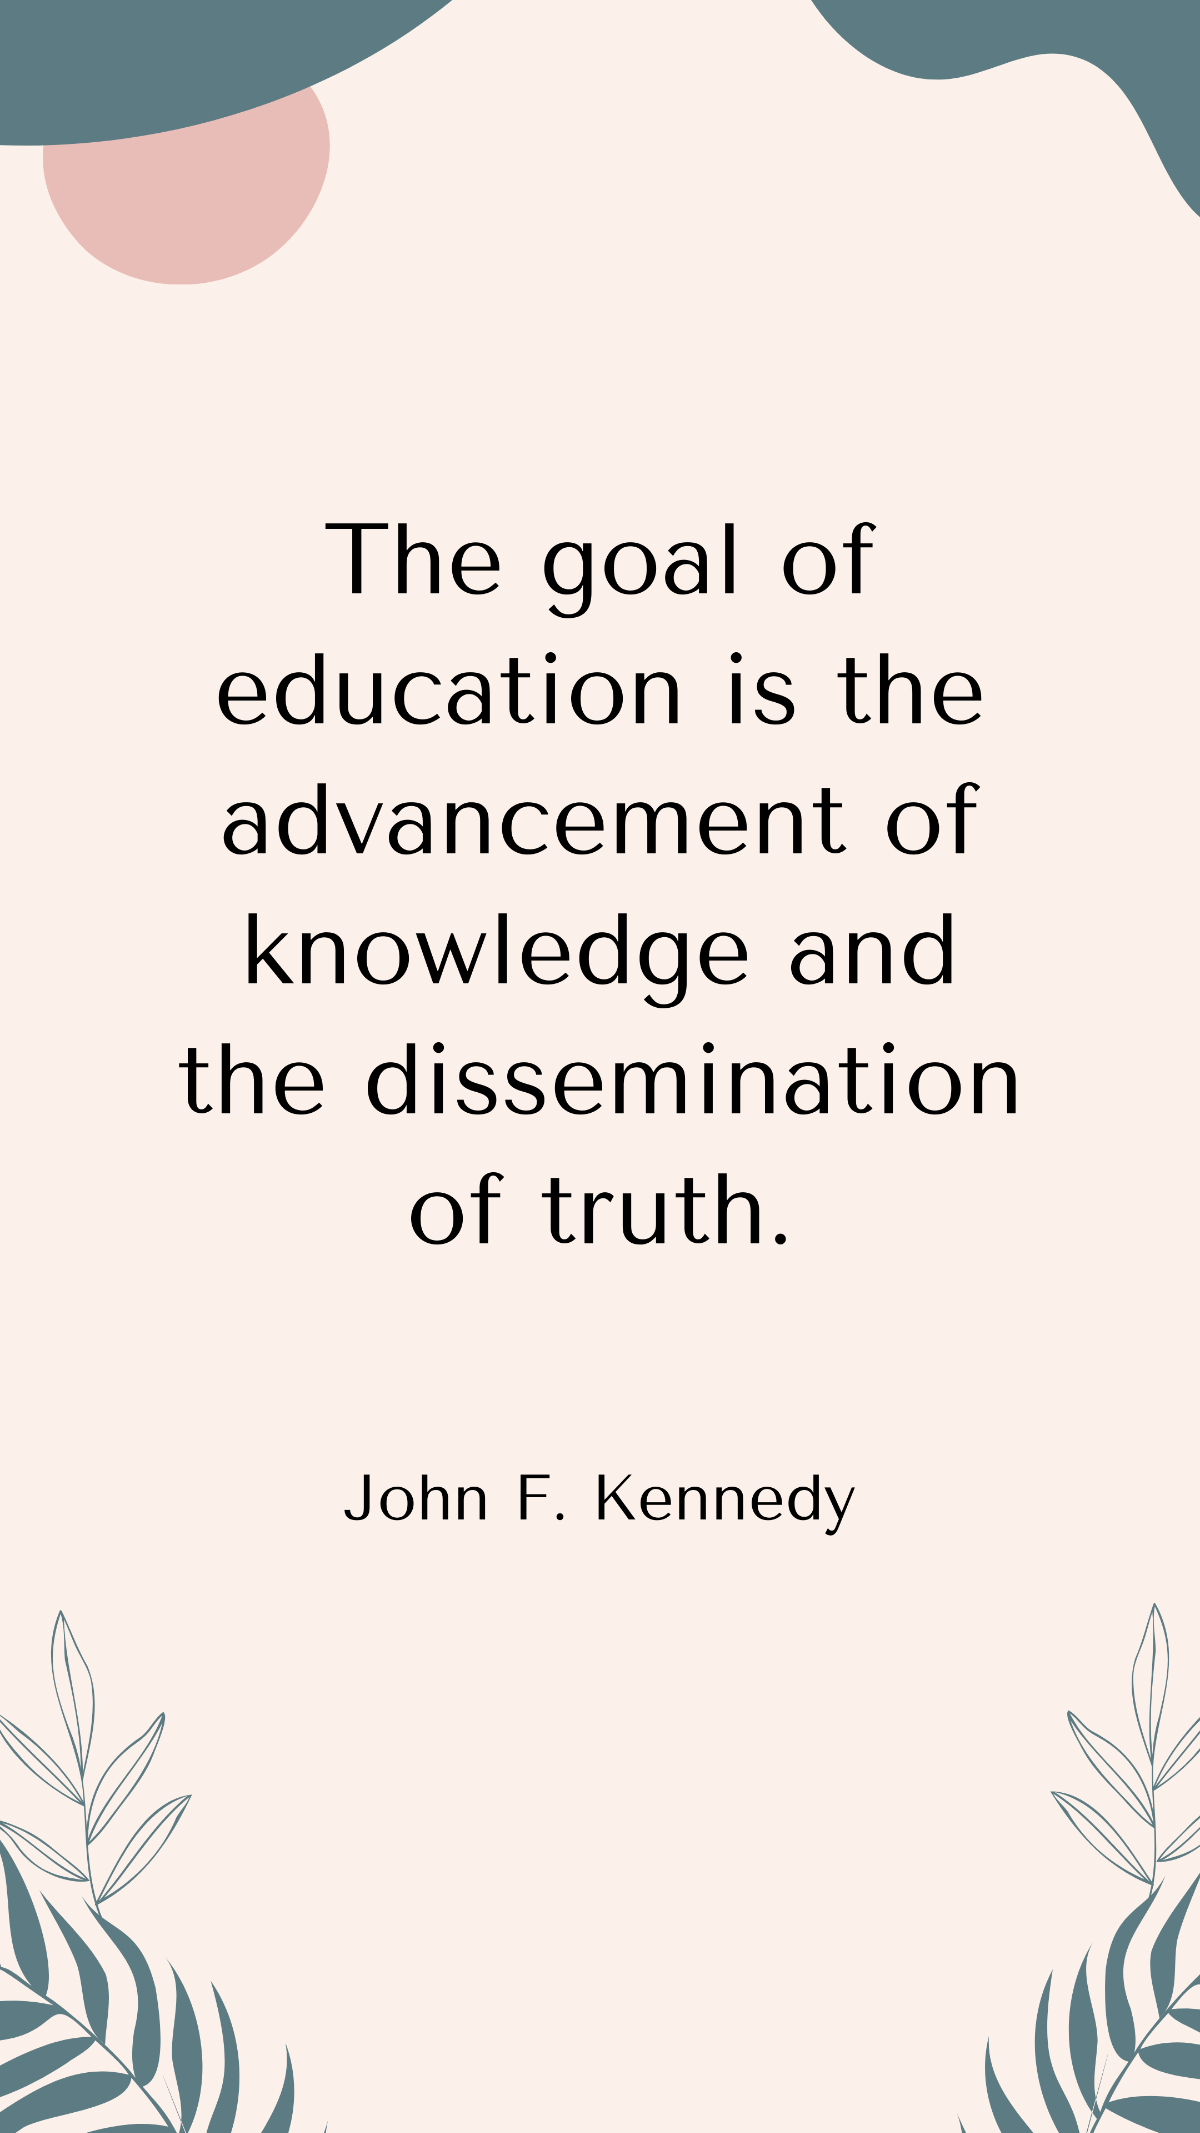 John F. Kennedy - The goal of education is the advancement of knowledge and the dissemination of truth. Template